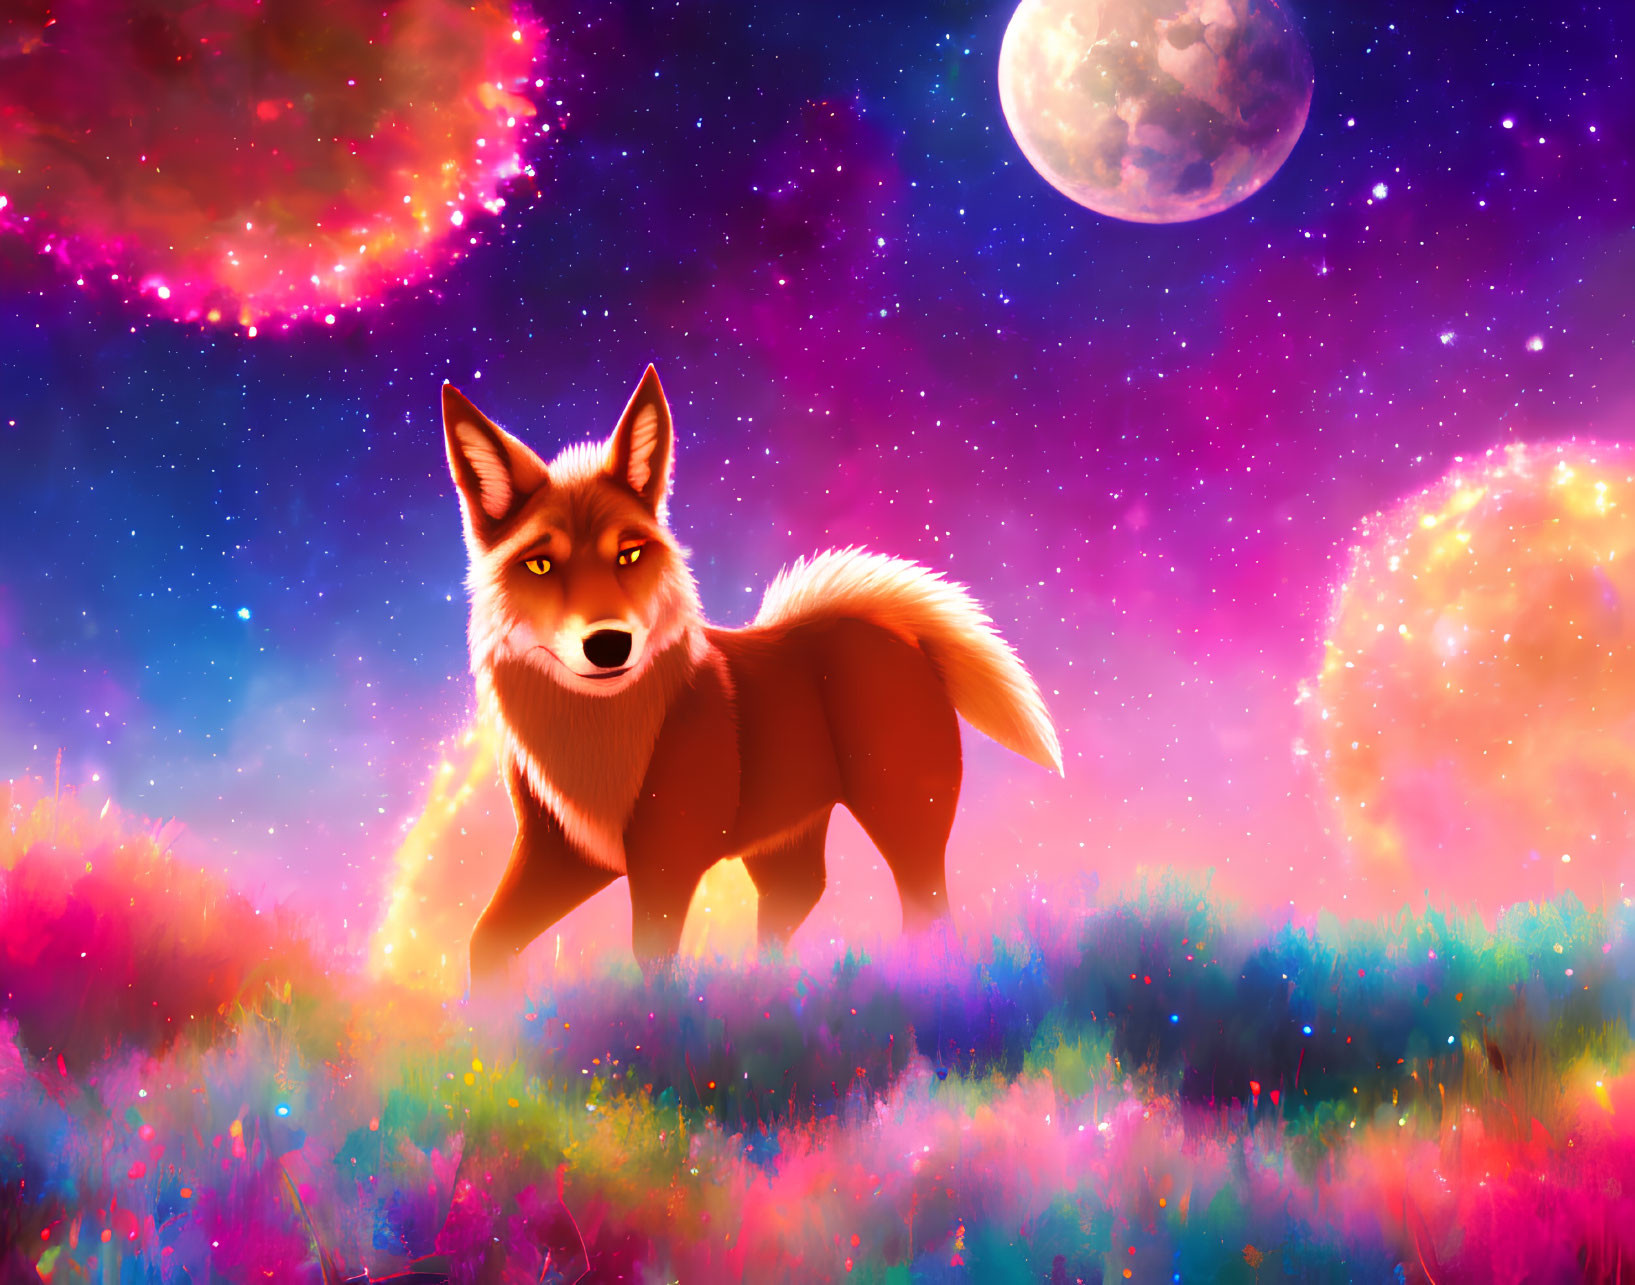 Colorful Fox in Fantasy Meadow with Moon and Orbs